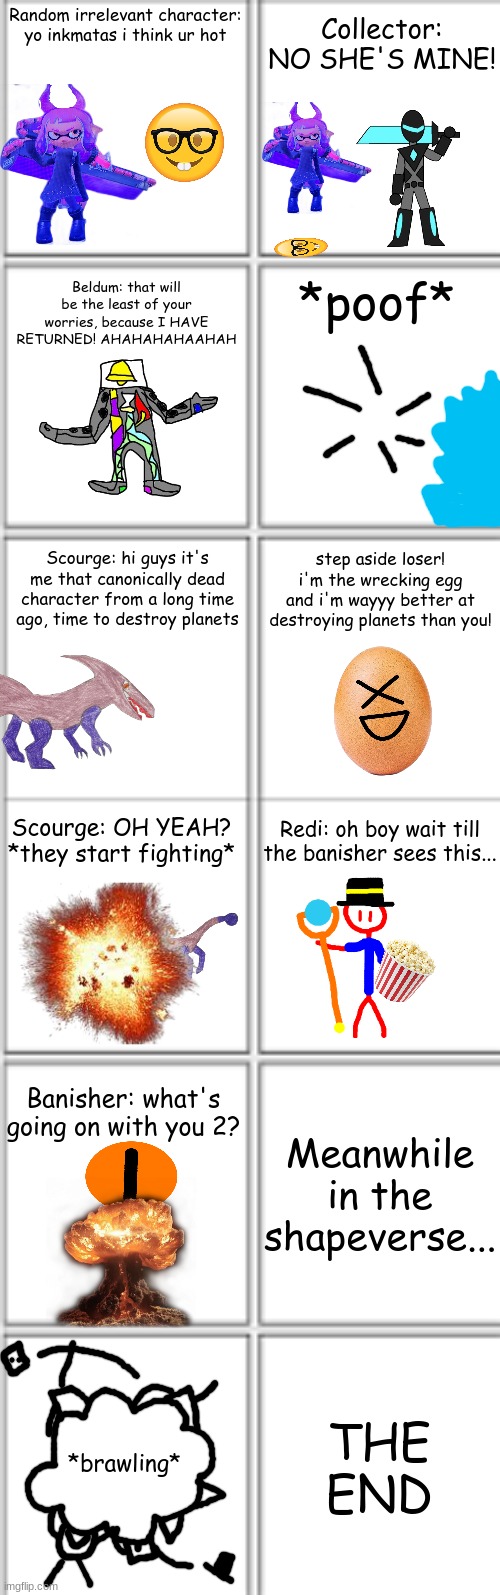 LocalMemer Productions presents: SHITPOST WARS | Collector: NO SHE'S MINE! Random irrelevant character: yo inkmatas i think ur hot; Beldum: that will be the least of your worries, because I HAVE RETURNED! AHAHAHAHAAHAH; *poof*; step aside loser! i'm the wrecking egg and i'm wayyy better at destroying planets than you! Scourge: hi guys it's me that canonically dead character from a long time ago, time to destroy planets; Scourge: OH YEAH? *they start fighting*; Redi: oh boy wait till the banisher sees this... Banisher: what's going on with you 2? Meanwhile in the shapeverse... THE END; *brawling* | image tagged in comic template 3x2 | made w/ Imgflip meme maker